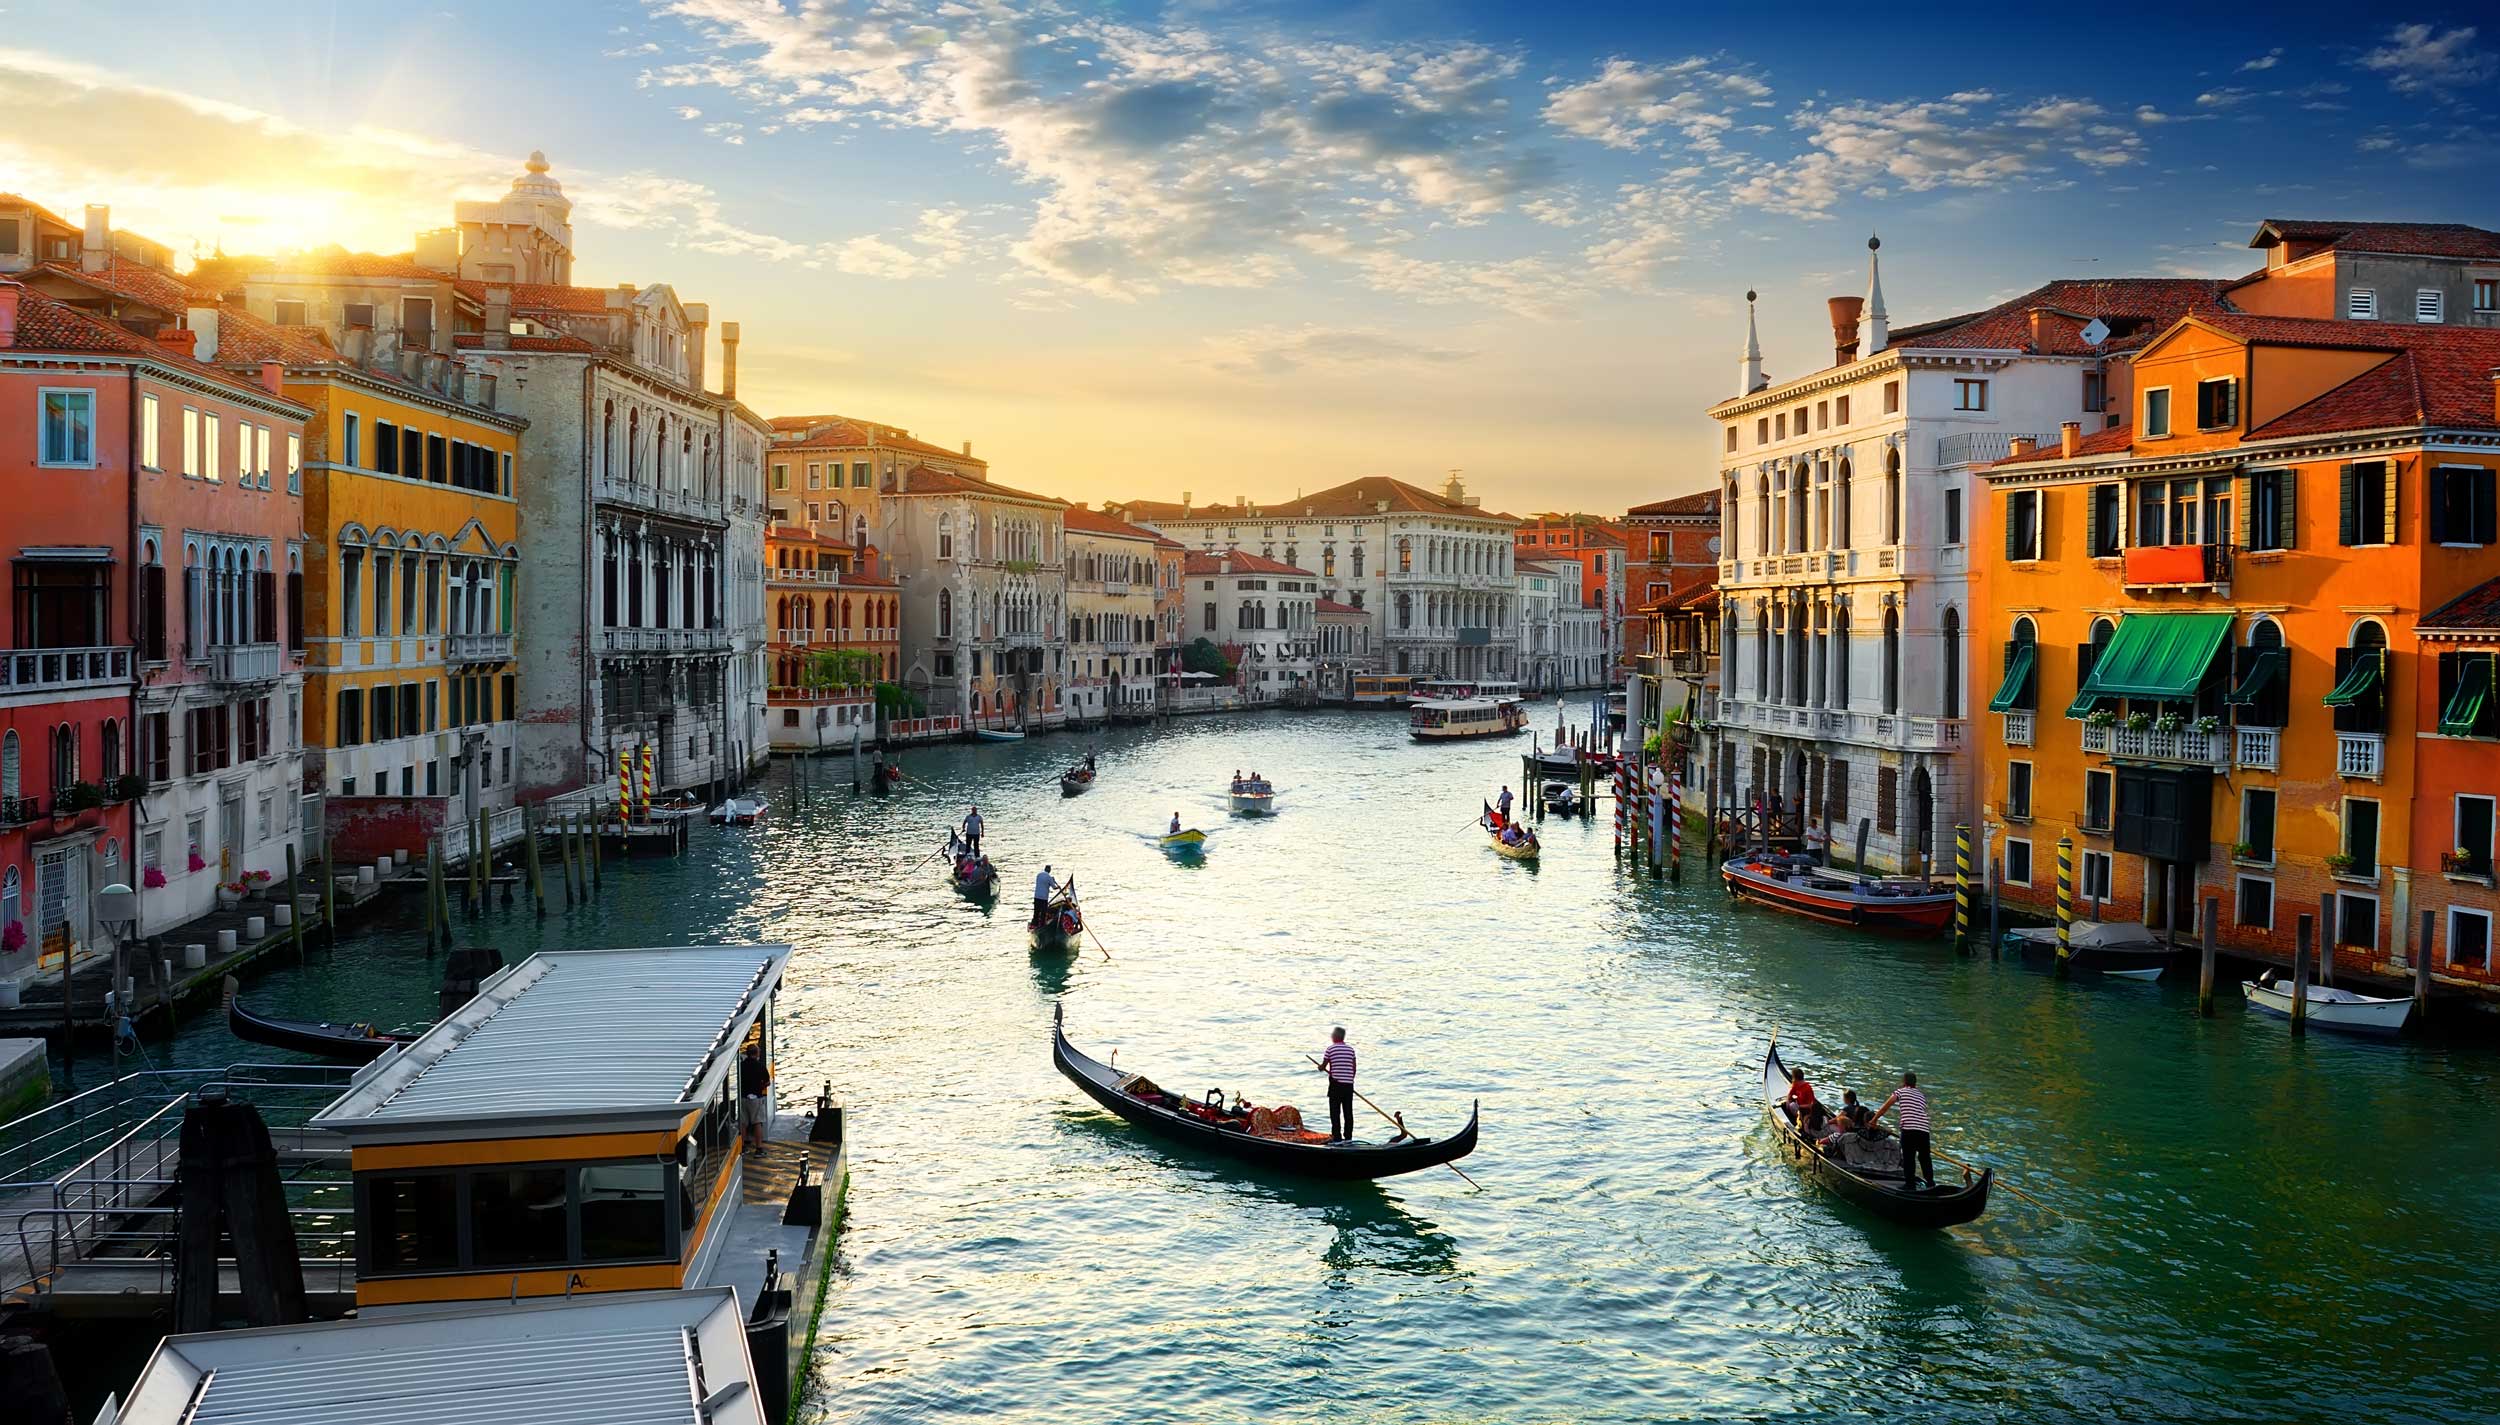 The magnificent gran canal